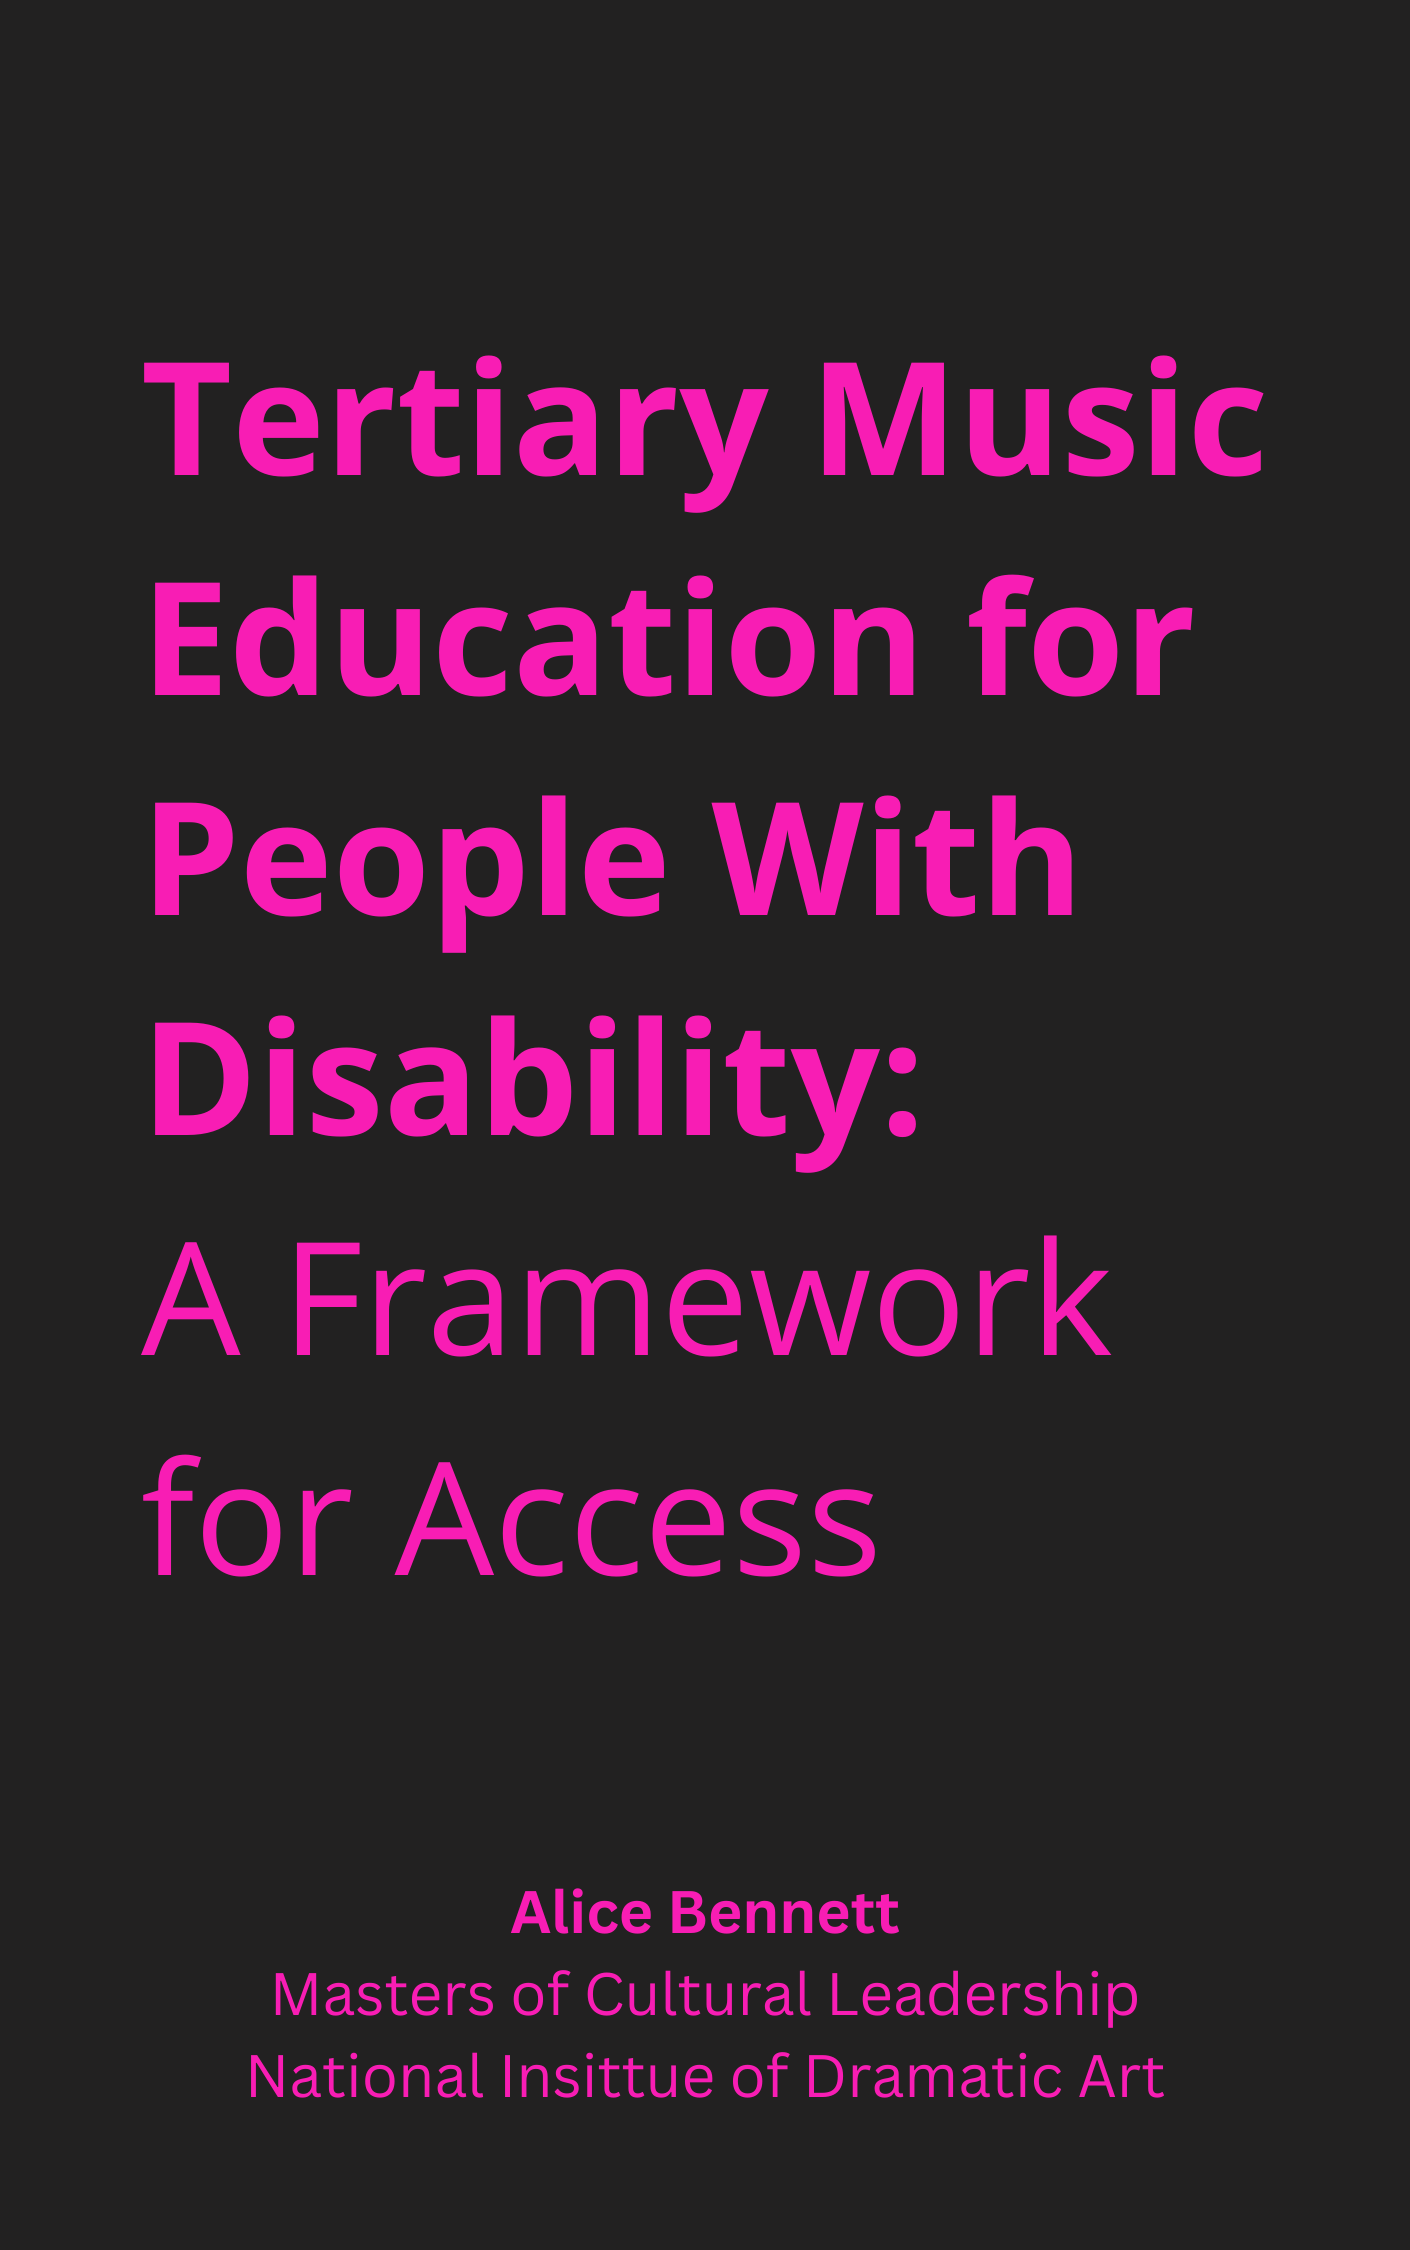 A regtangular image with a black background and pink text reading "Tertiary music education for people with disability: A framework for access. Alice Bennett, Masters of cultural Leadership, National Institute of Dramatic Art".